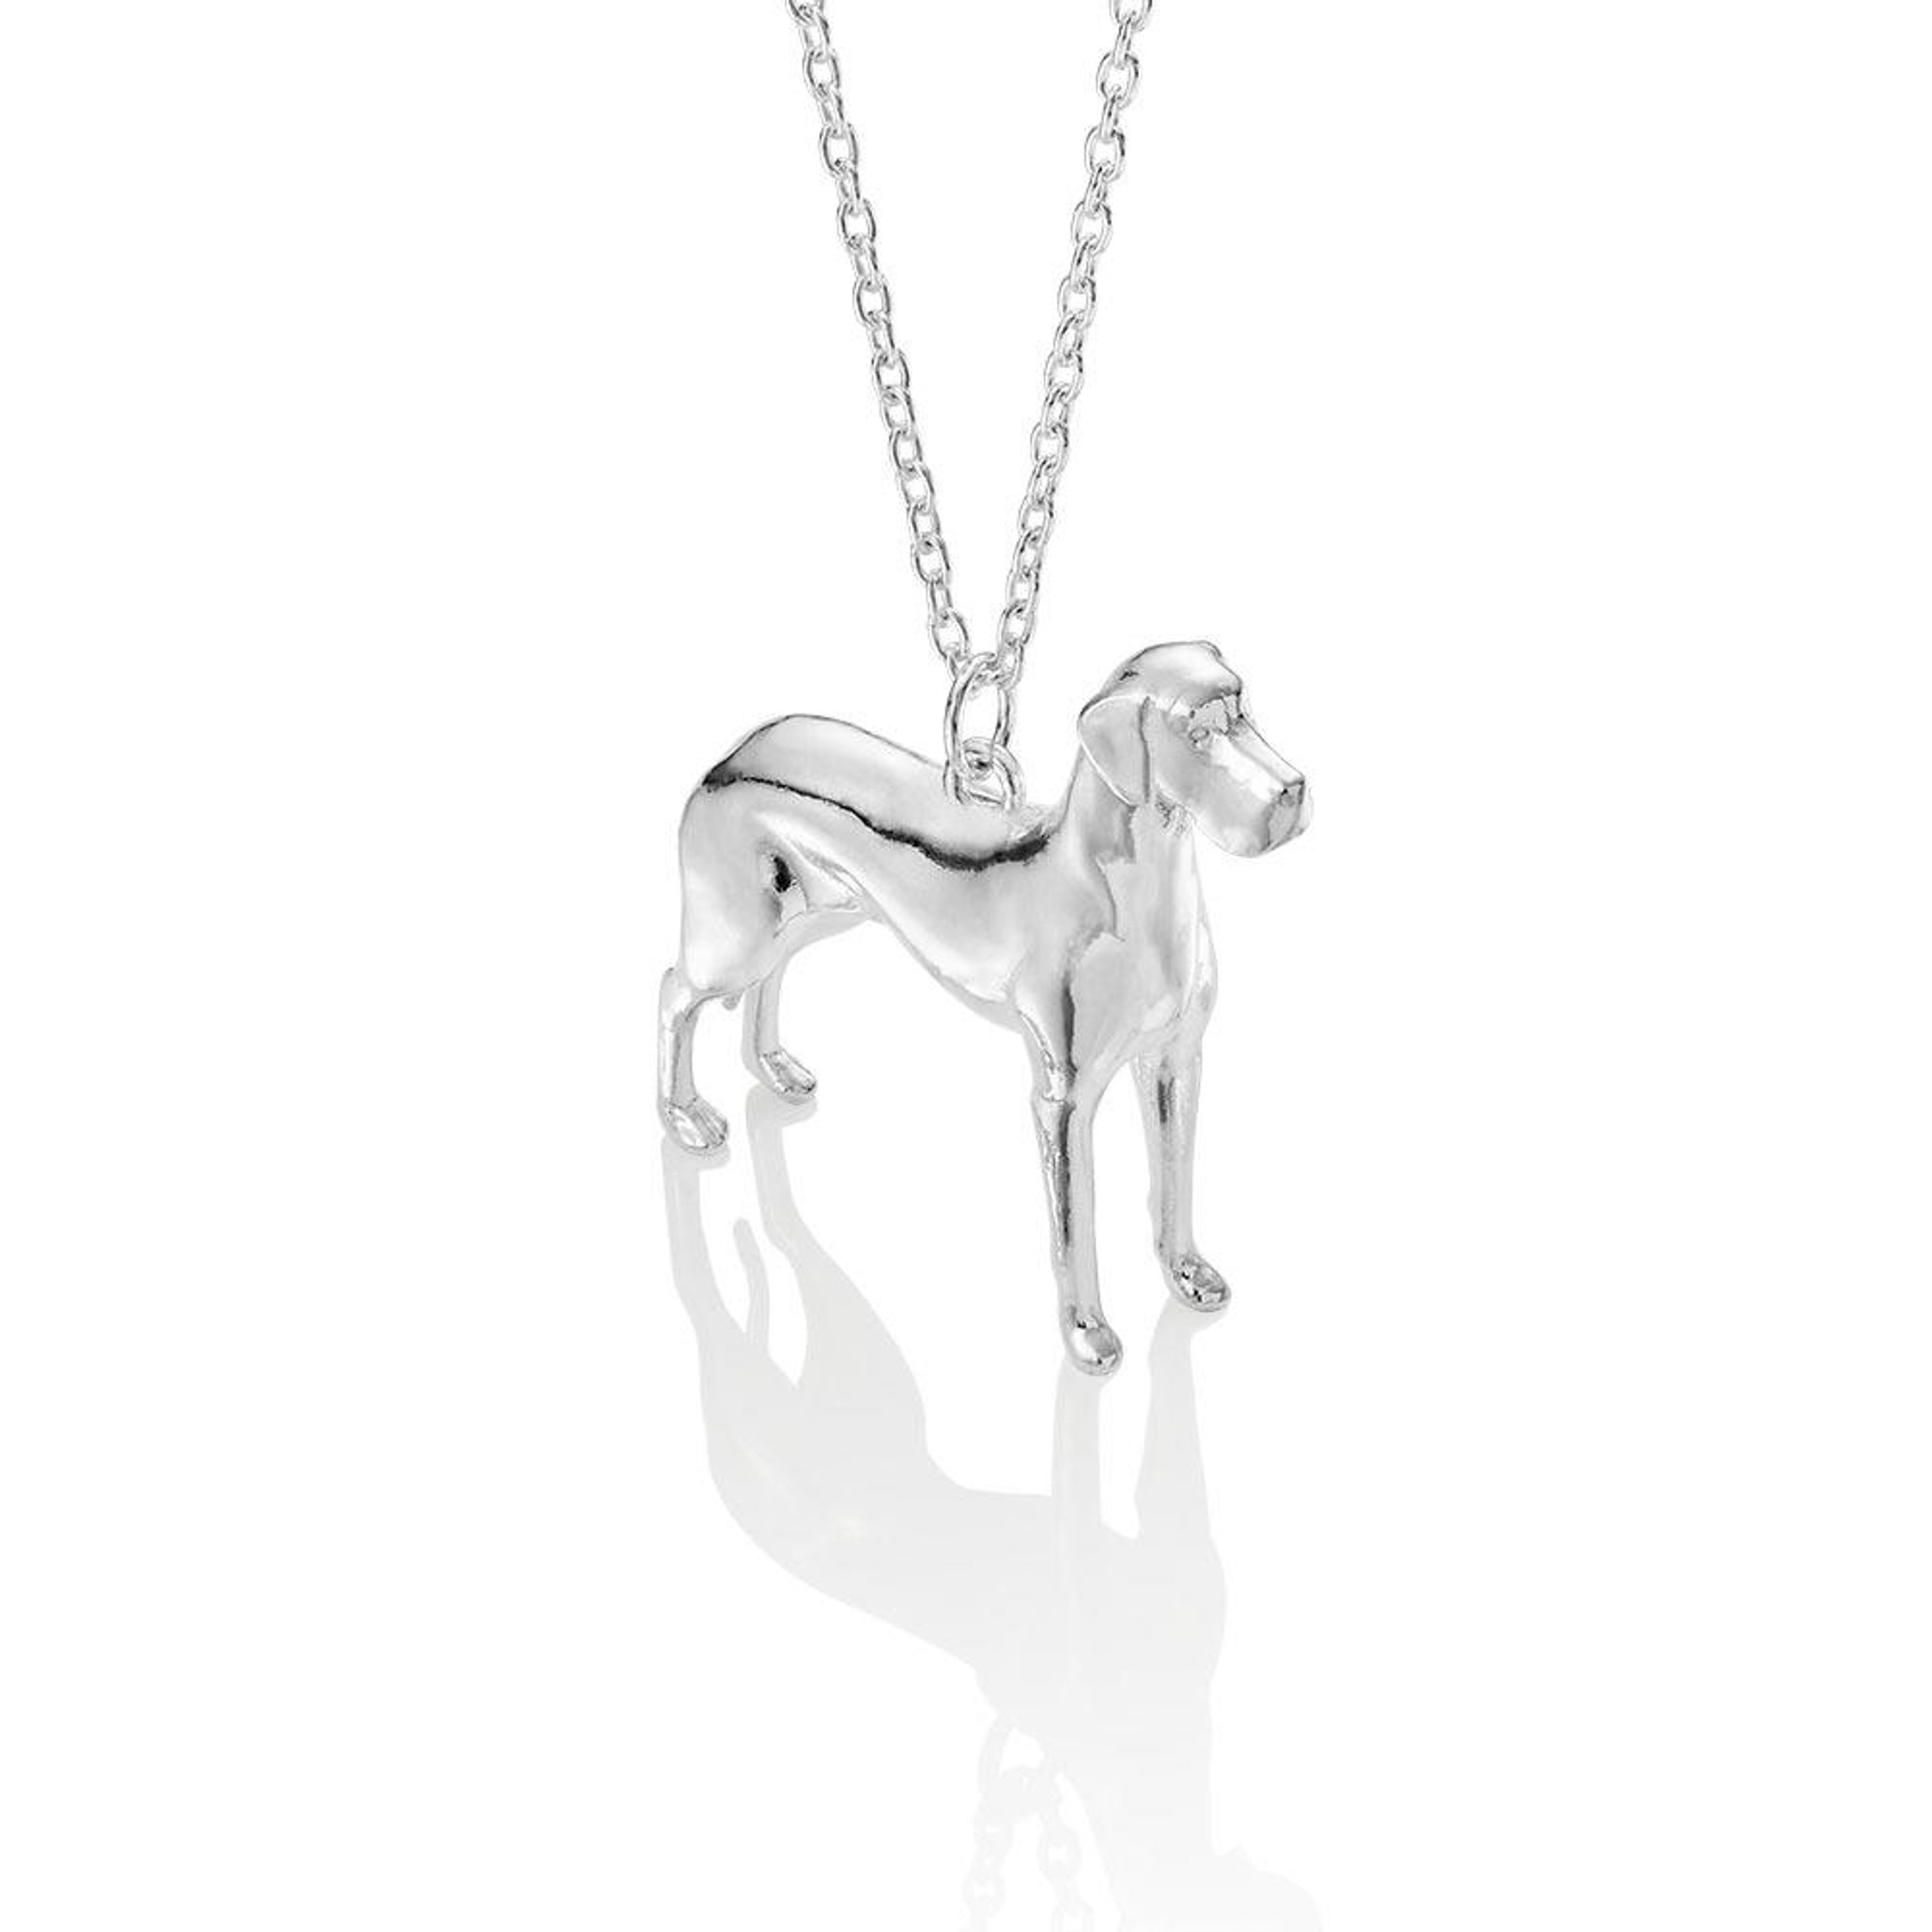 solid sterling silver great dane sculpture dog charm pendant